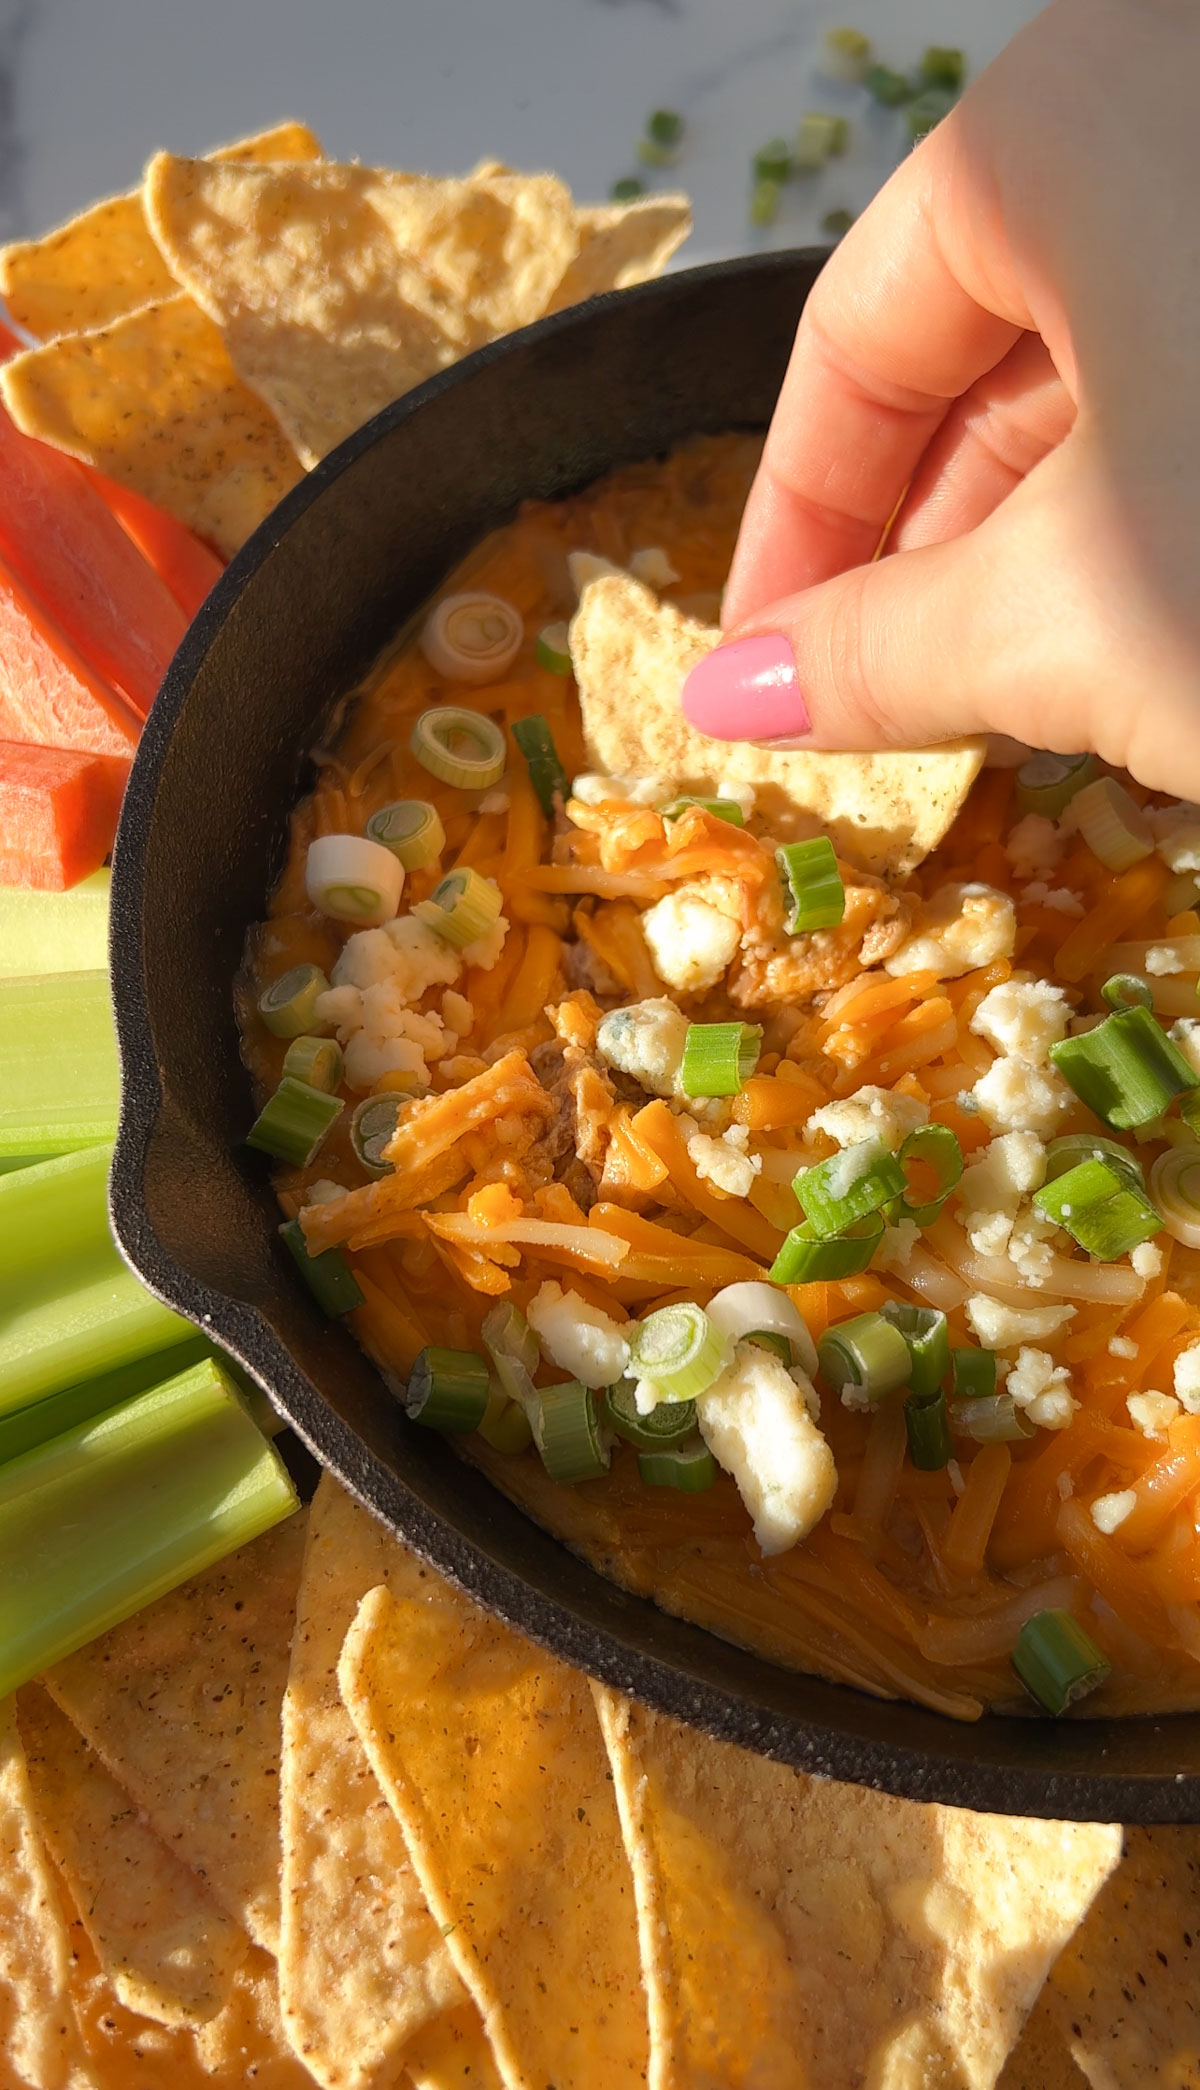 A skillet of vegan buffalo chicken dip on the table with chips and veggie sticks.